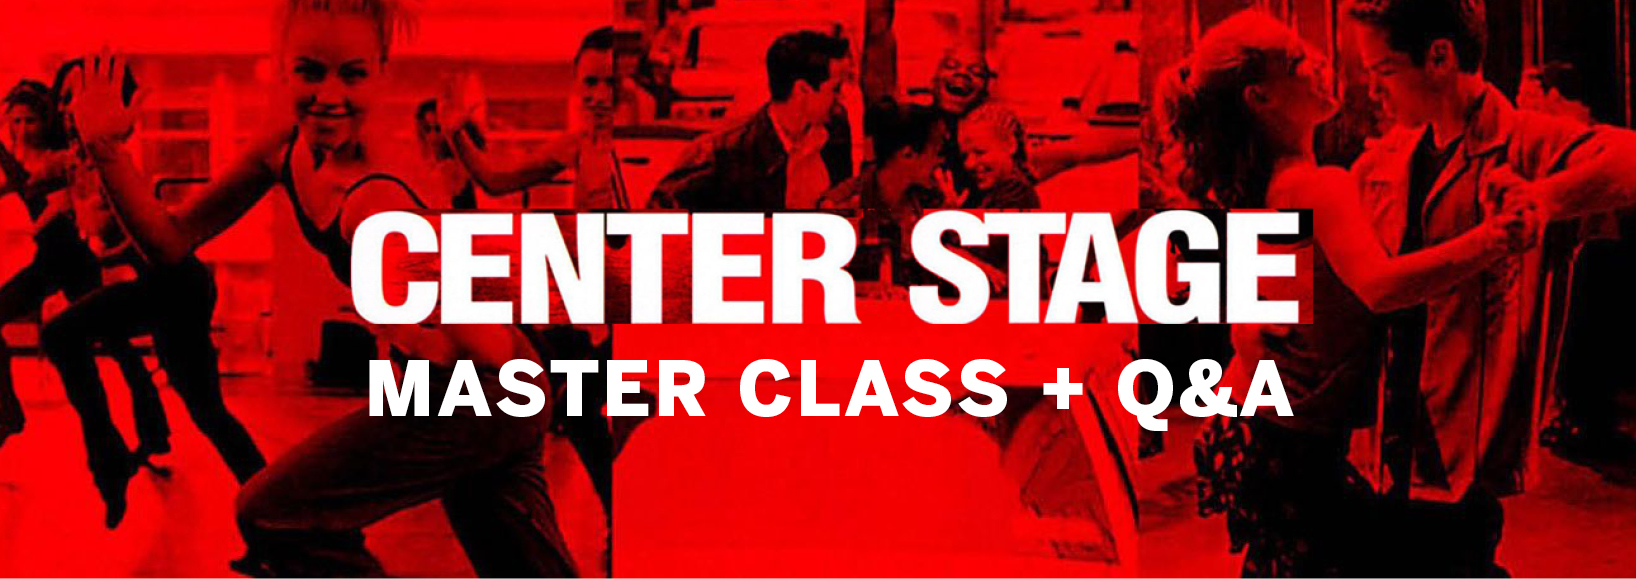 Center Stage Master Class